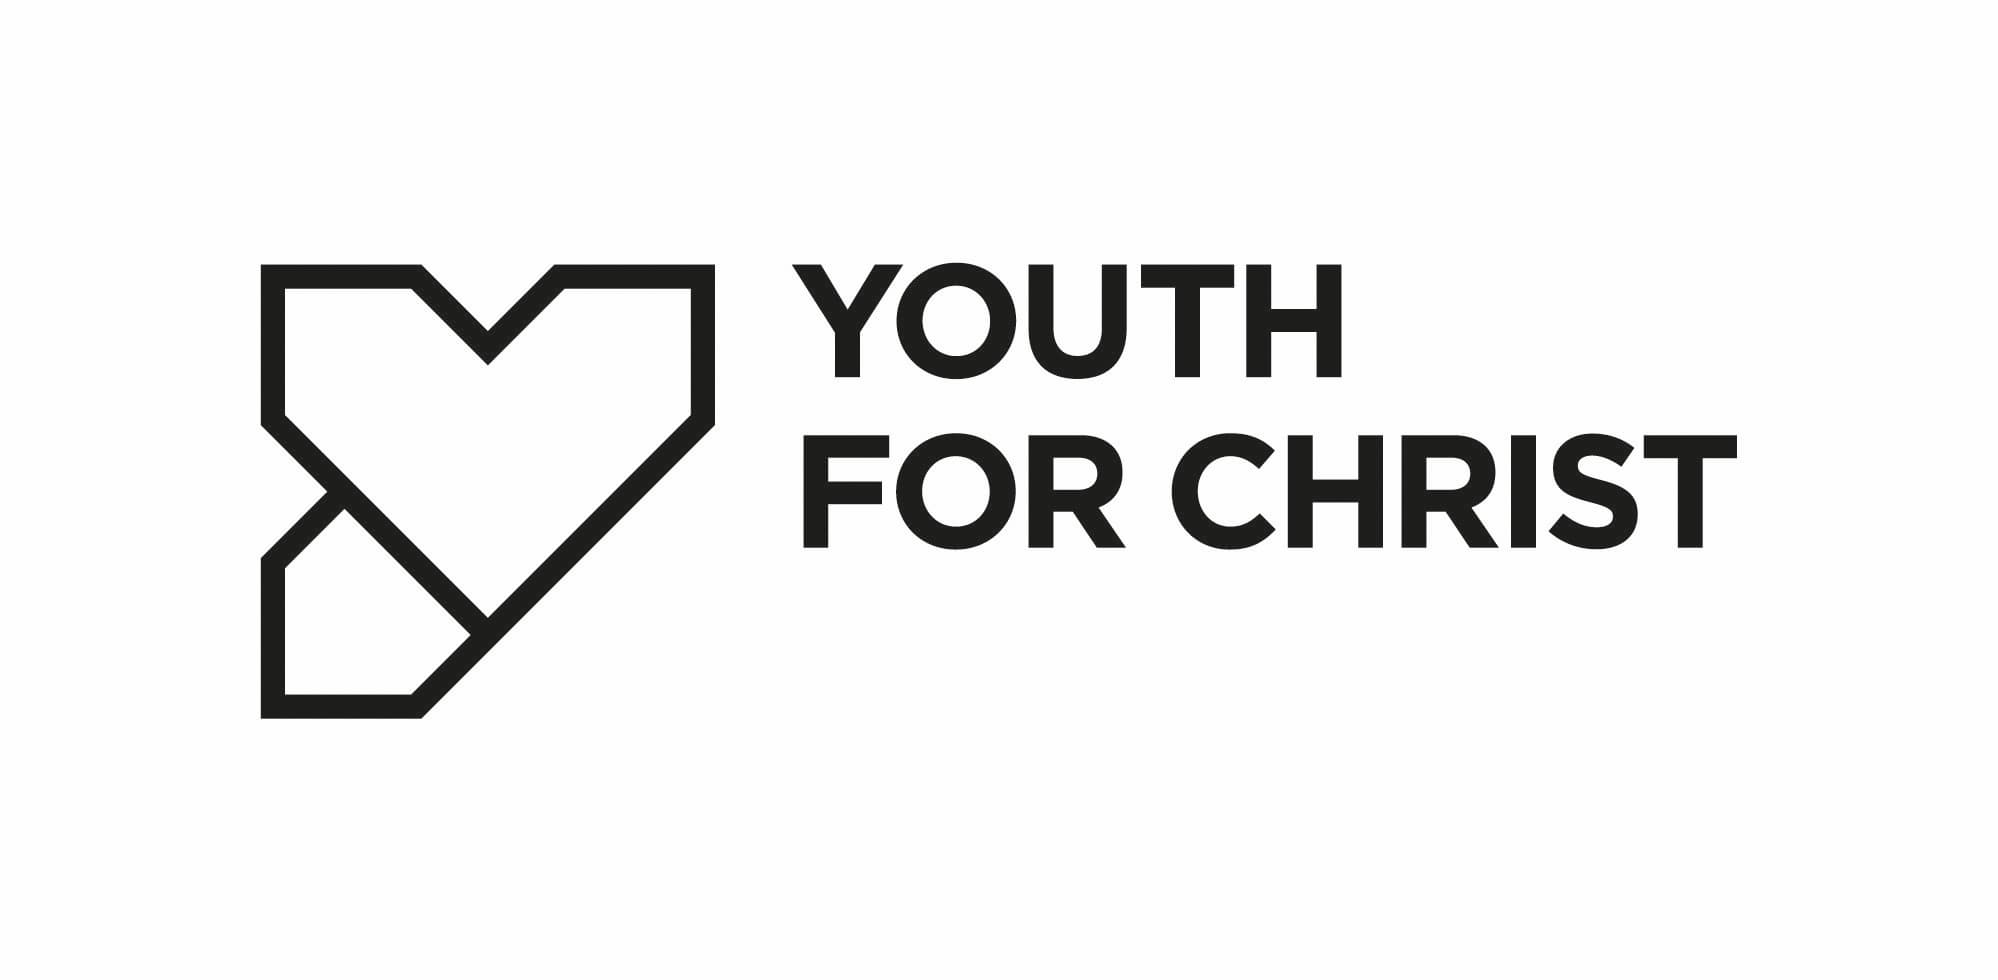 Youth-for-Christ-e1514565793928-2